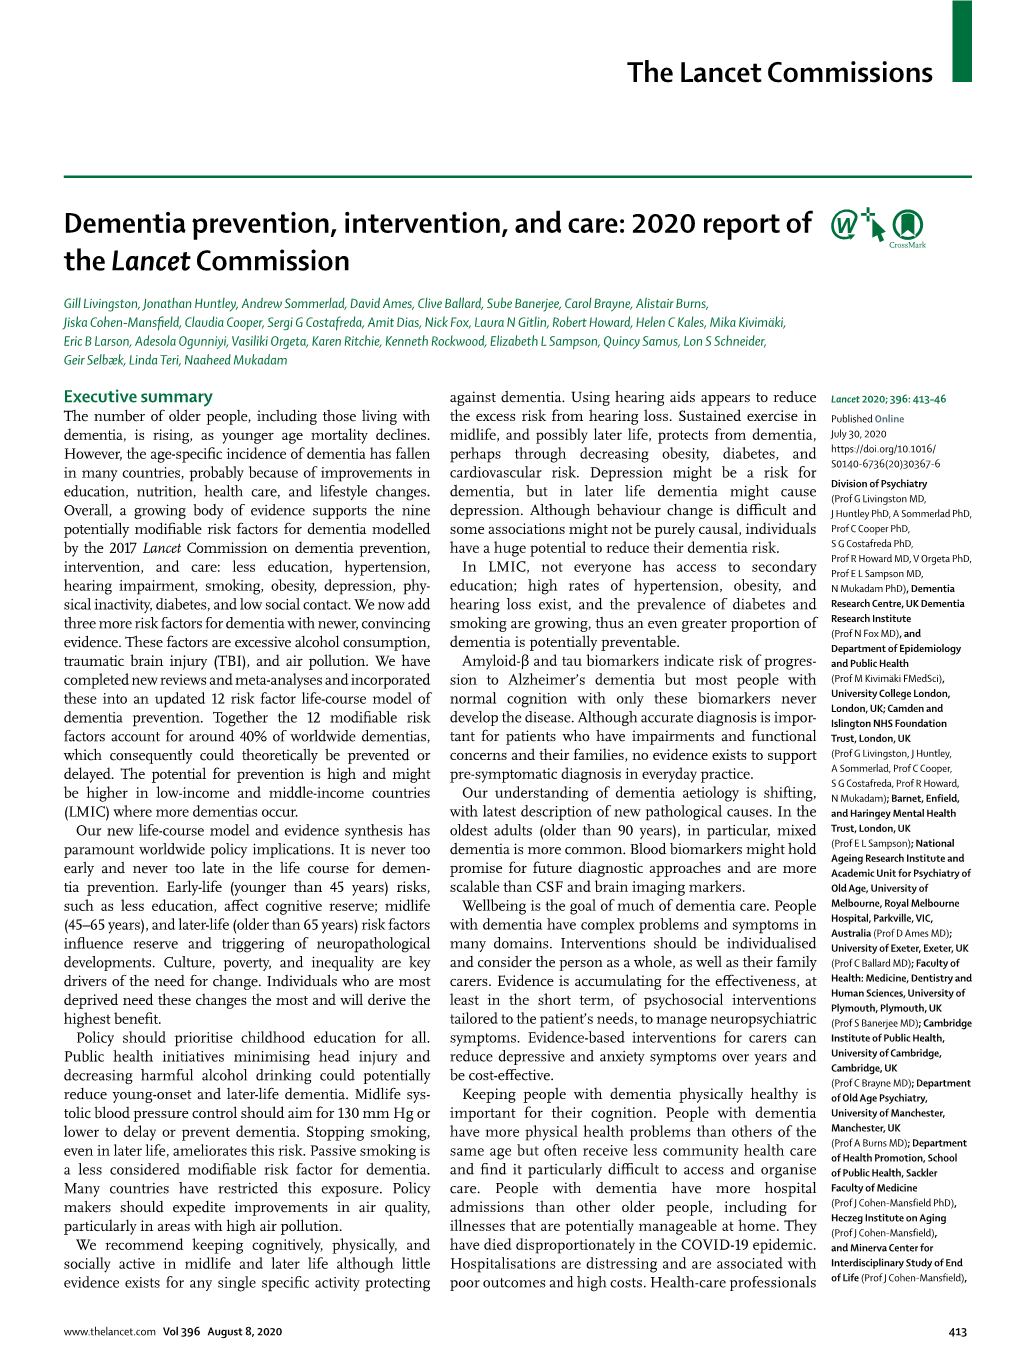 Dementia Prevention, Intervention, and Care: 2020 Report of the Lancet Commission